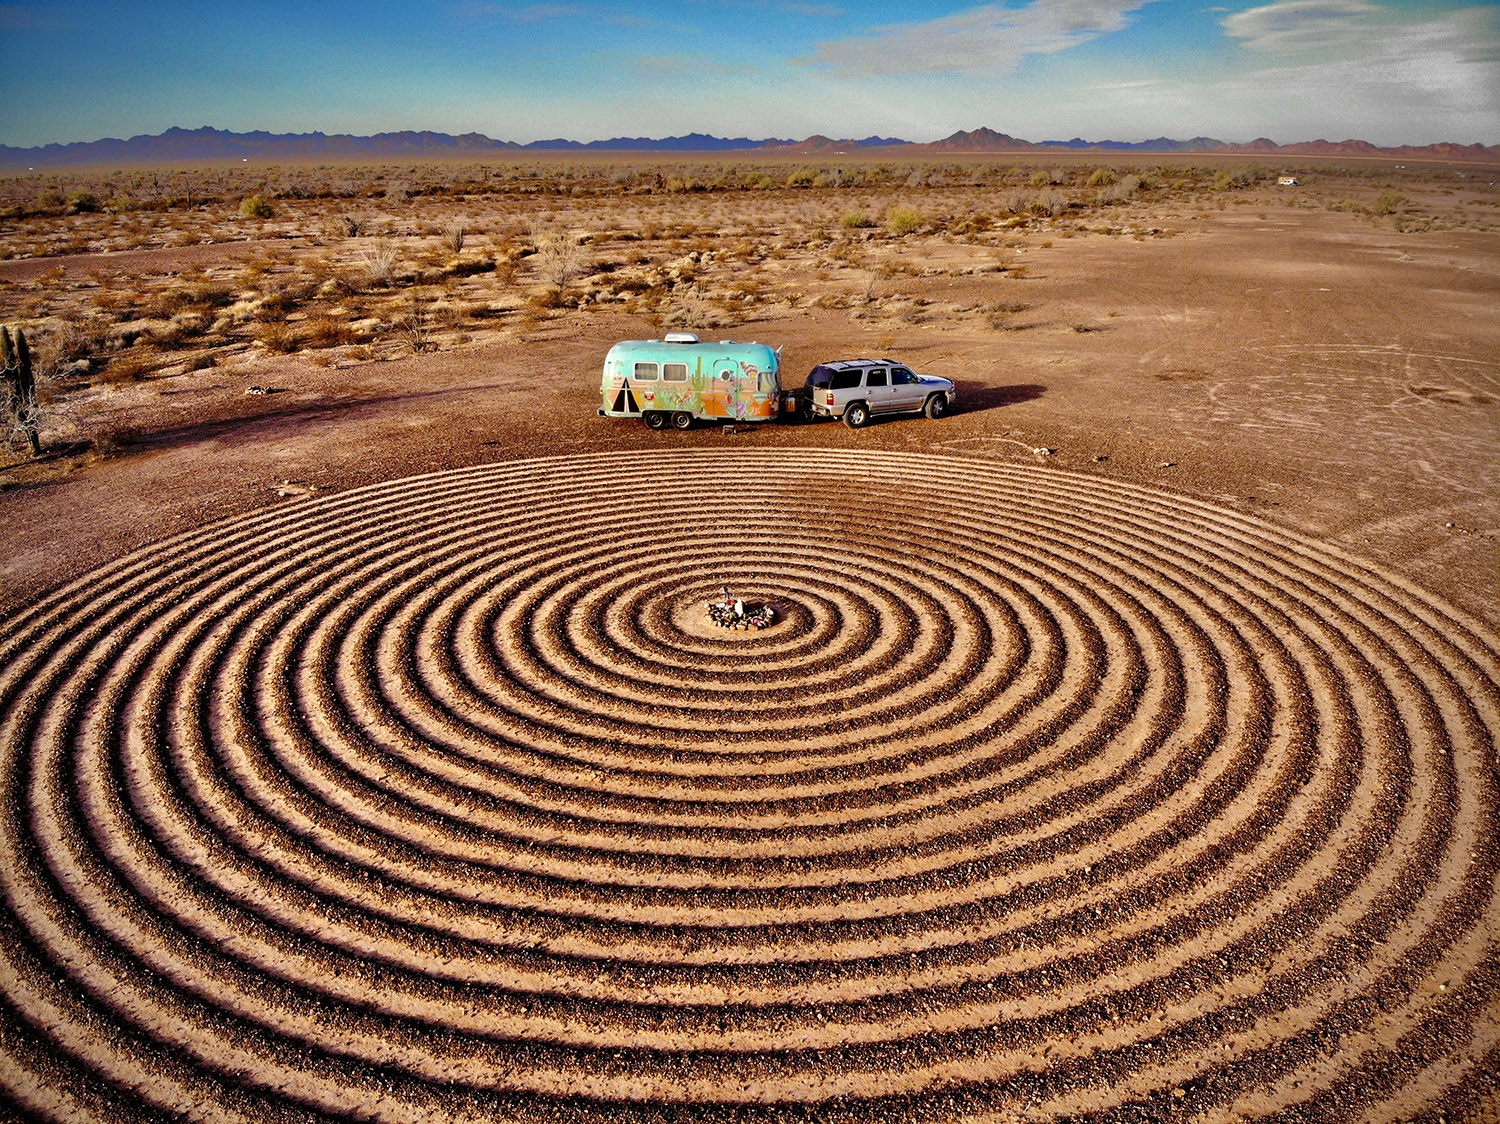 SUV with airstream trailer parked near a spiral labyrinth carved into the earth in a desert.